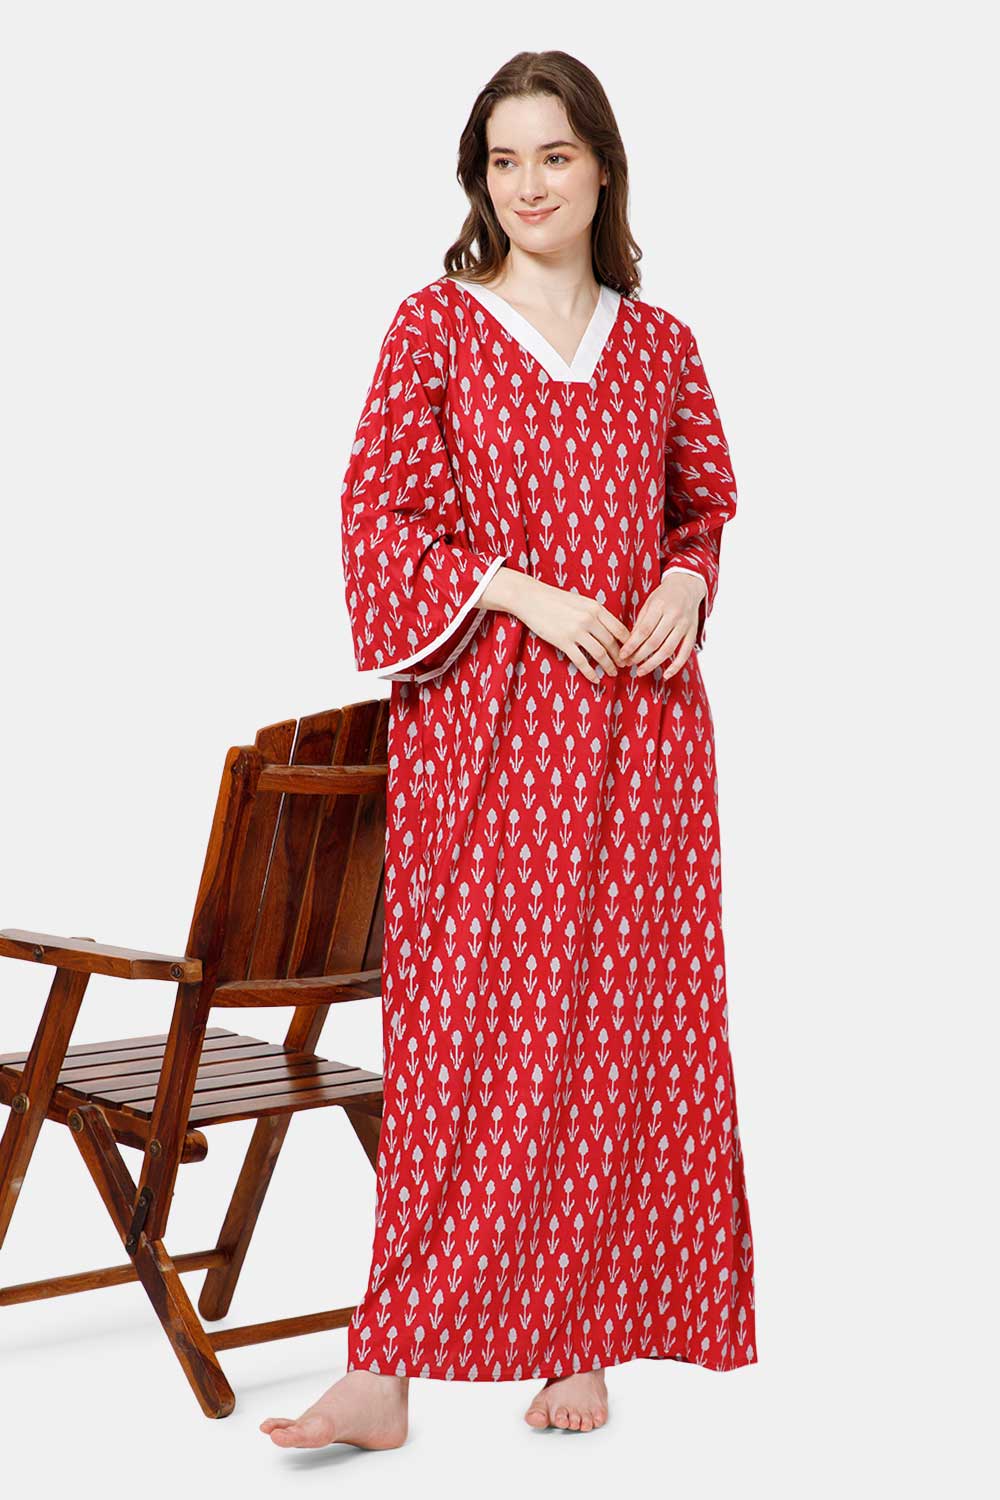 Naidu Hall V Neck Printed Cotton Nighty with Long Bell Sleeves - Red - NT40